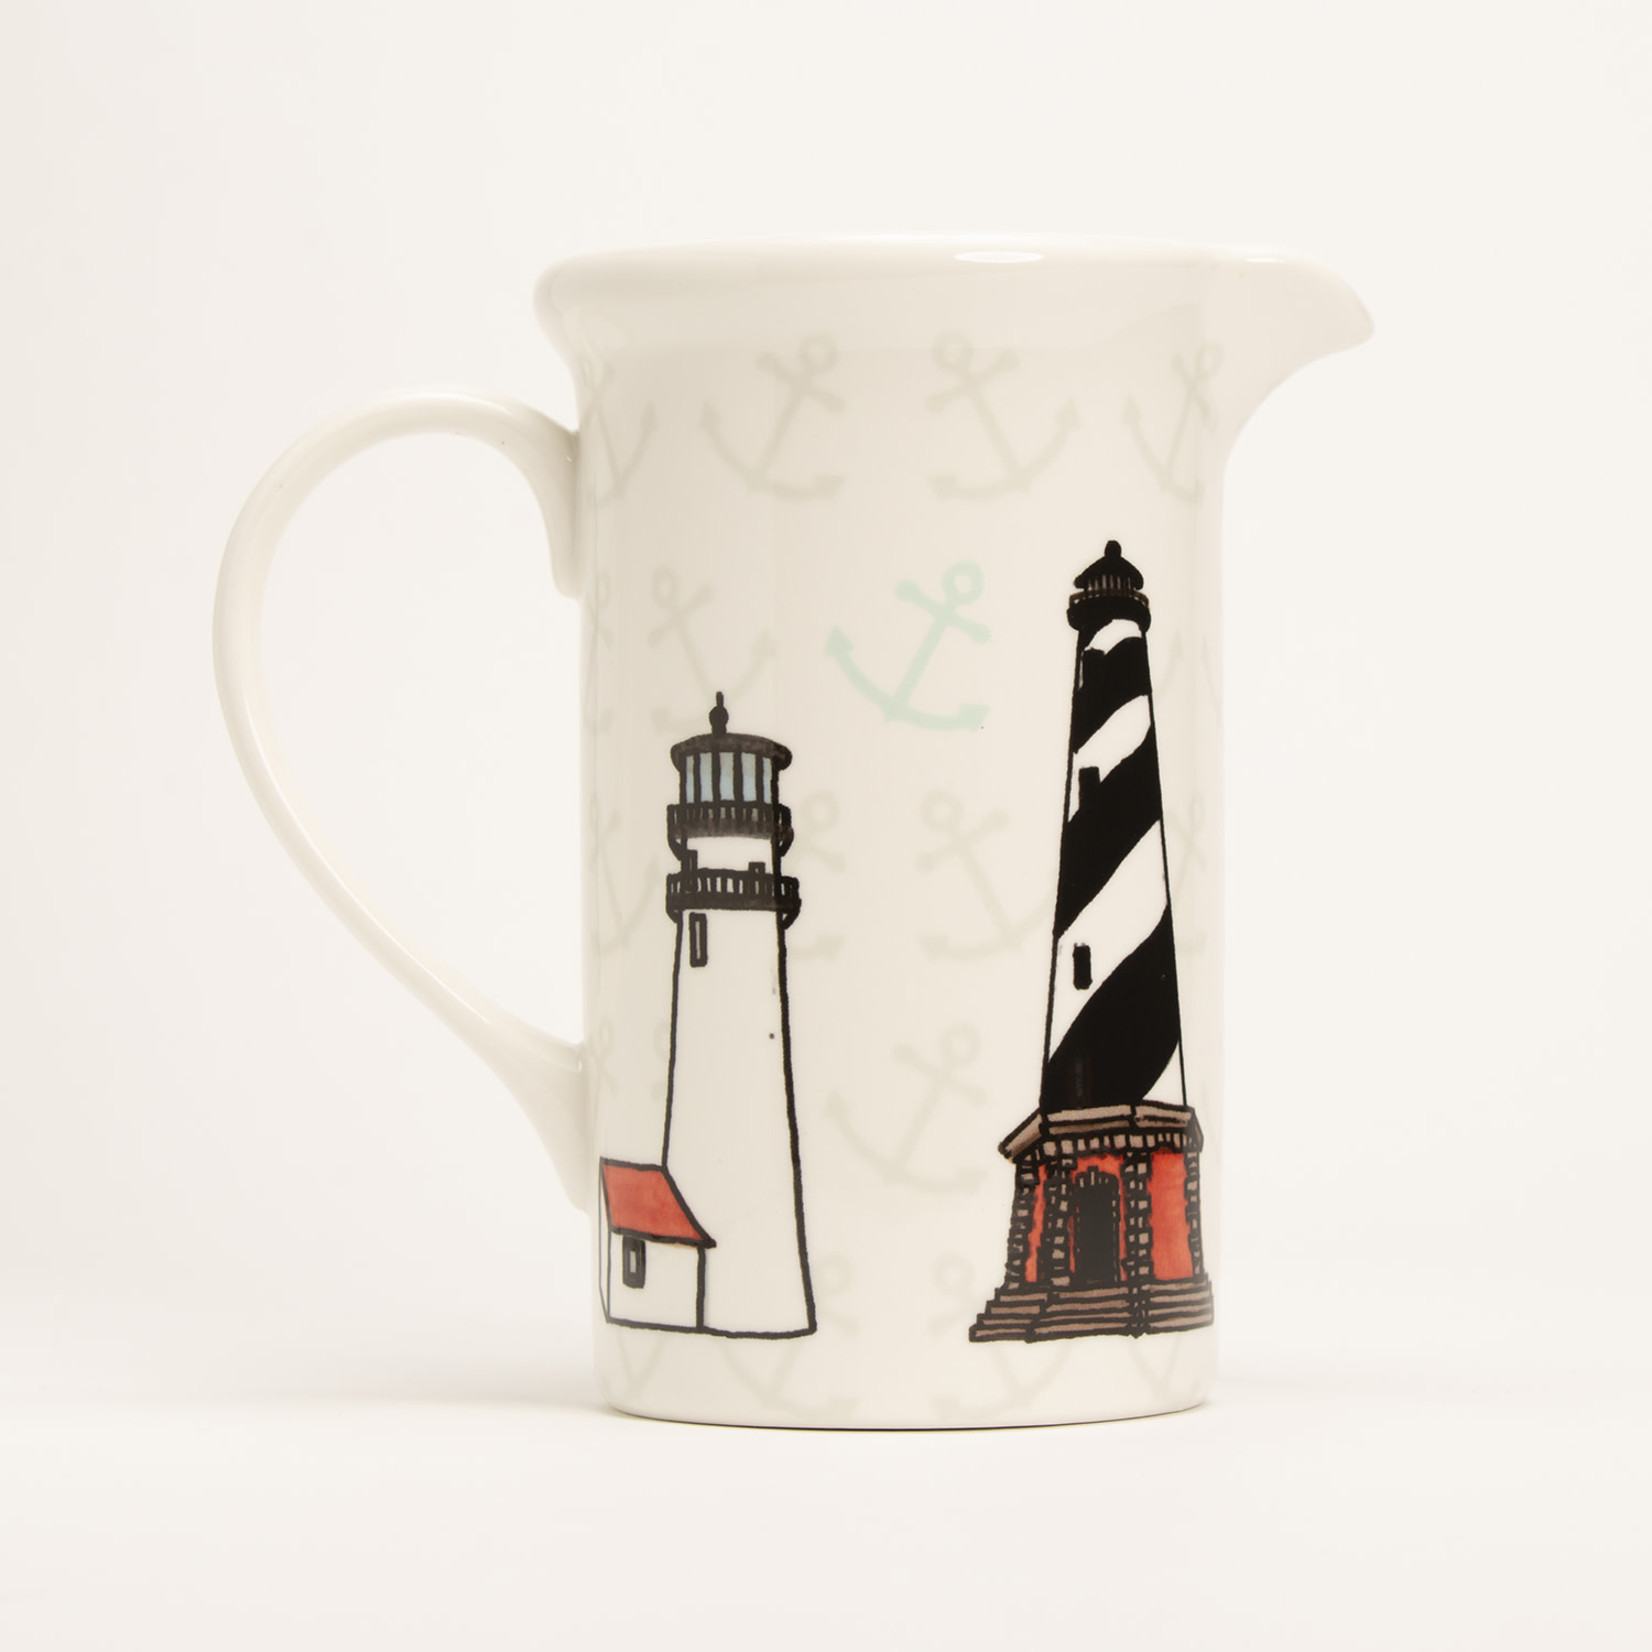 8" Pitcher - Lighthouses